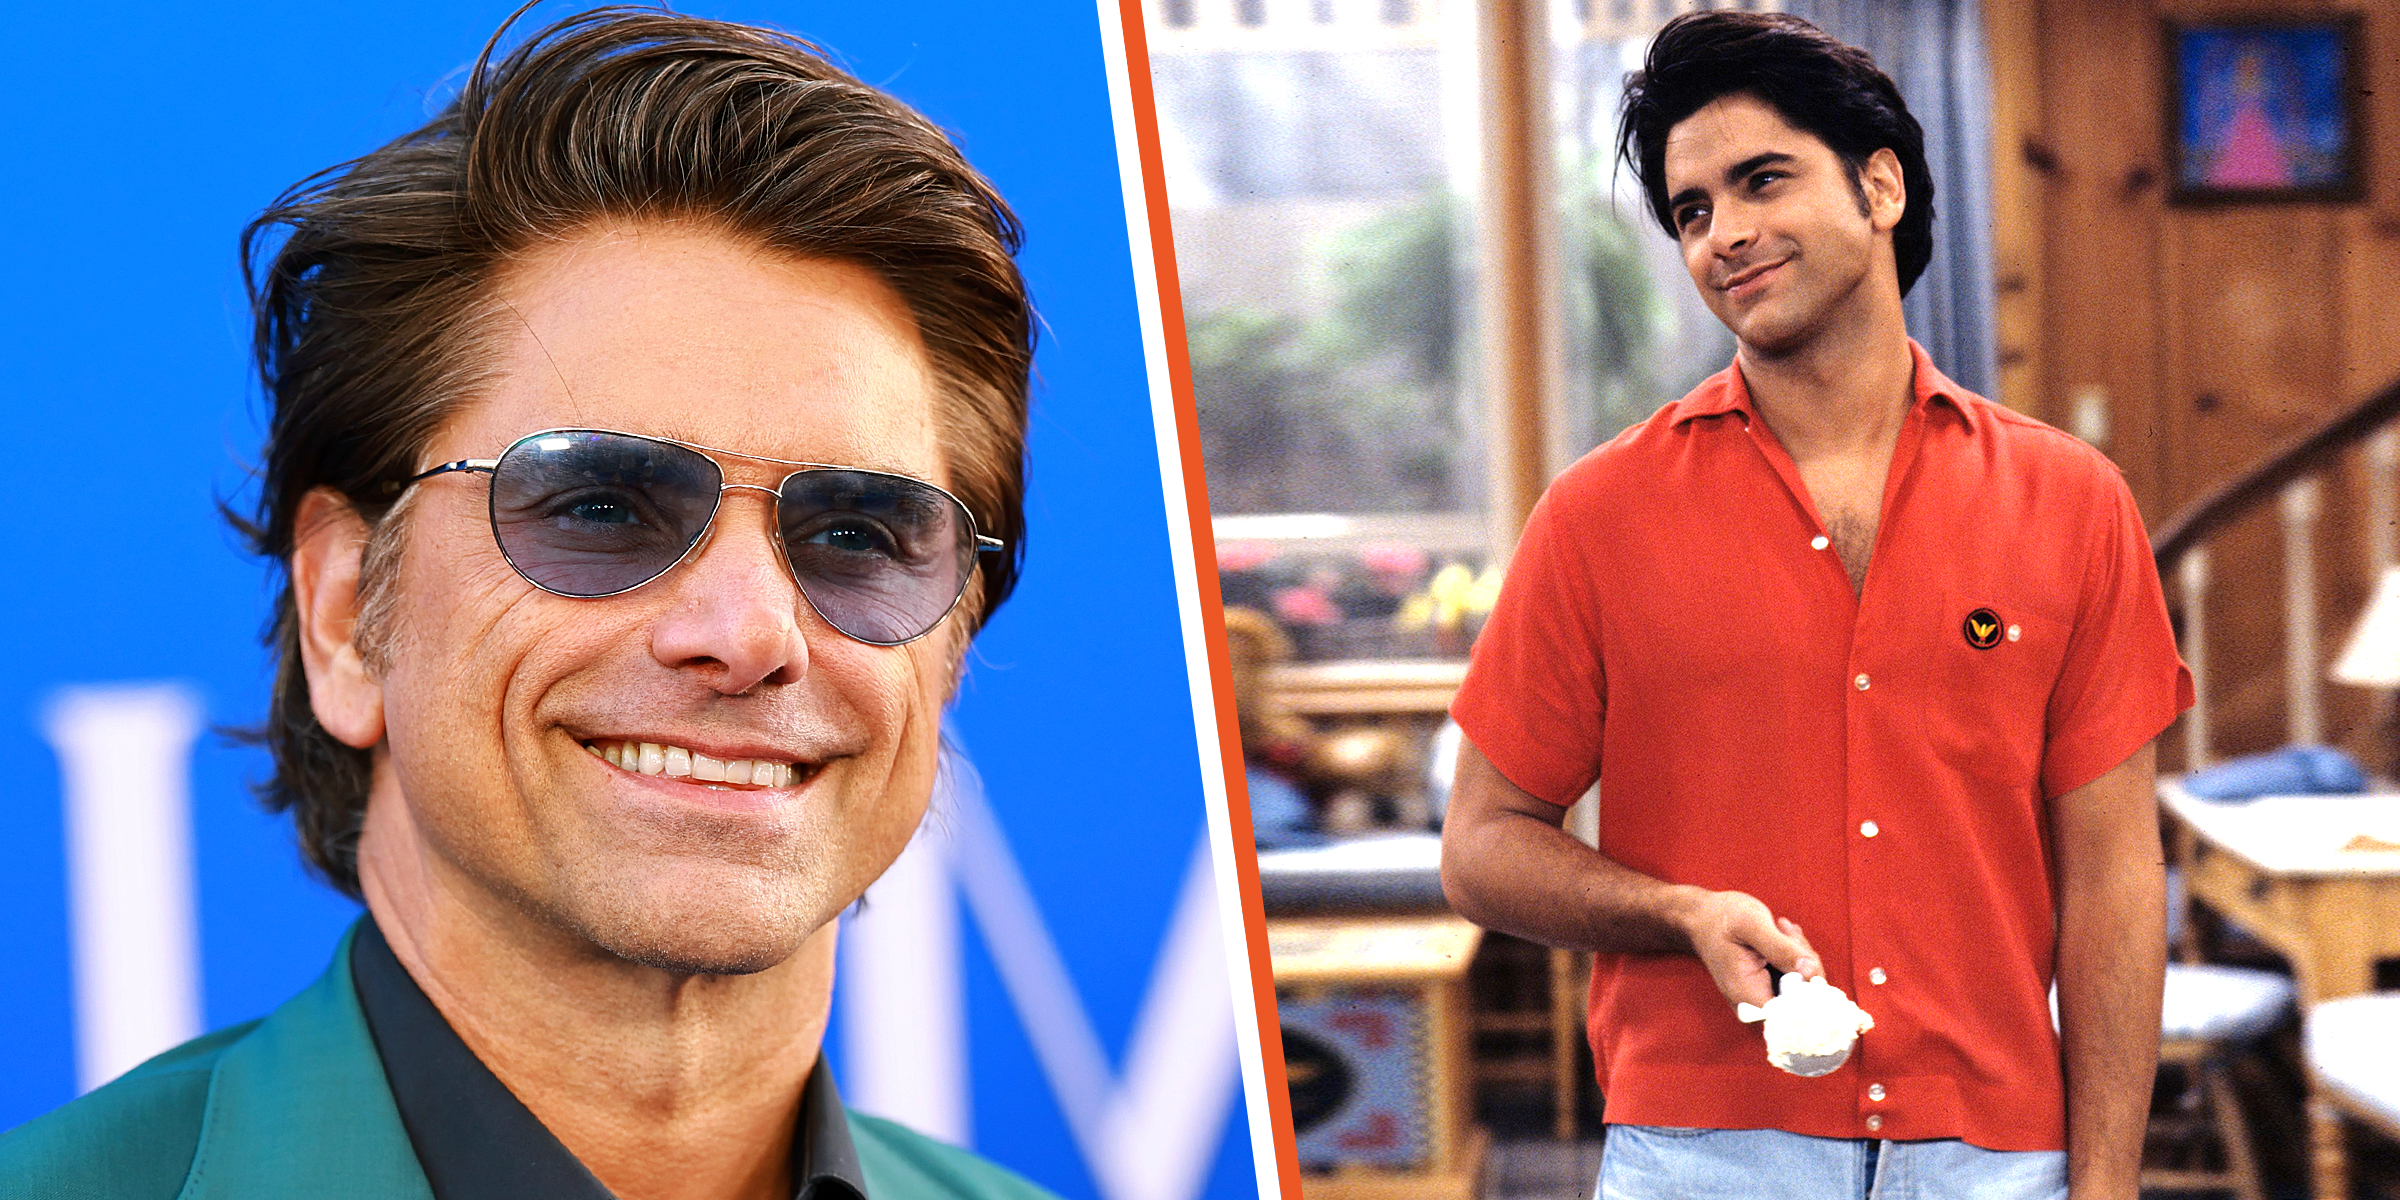 John Stamos now and then | Source: Getty Images